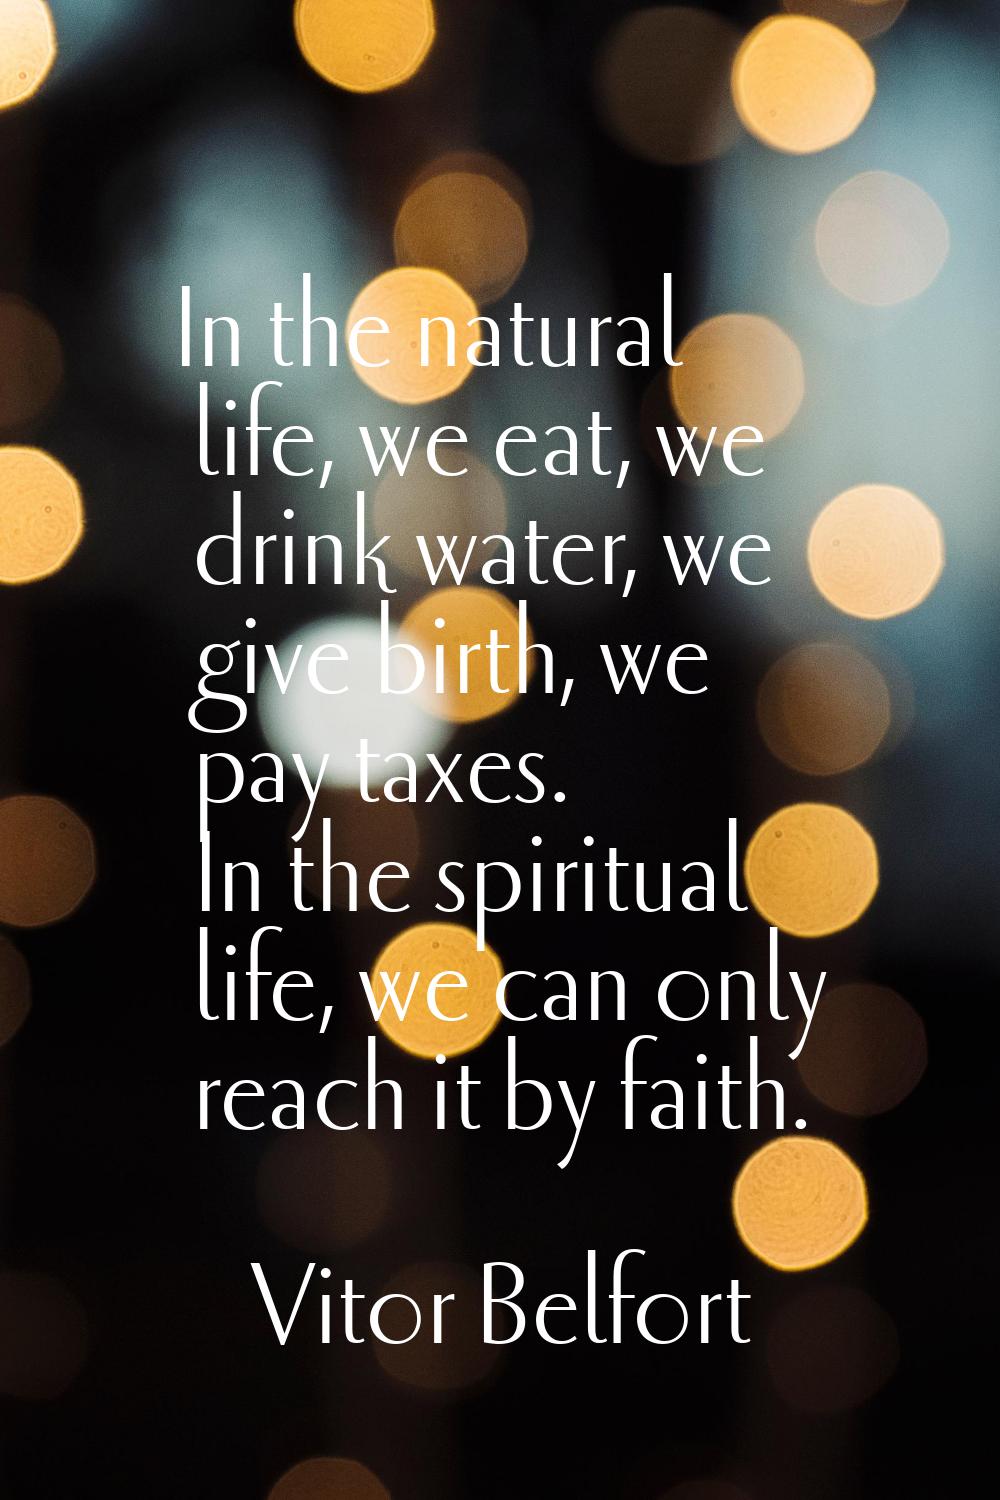 In the natural life, we eat, we drink water, we give birth, we pay taxes. In the spiritual life, we